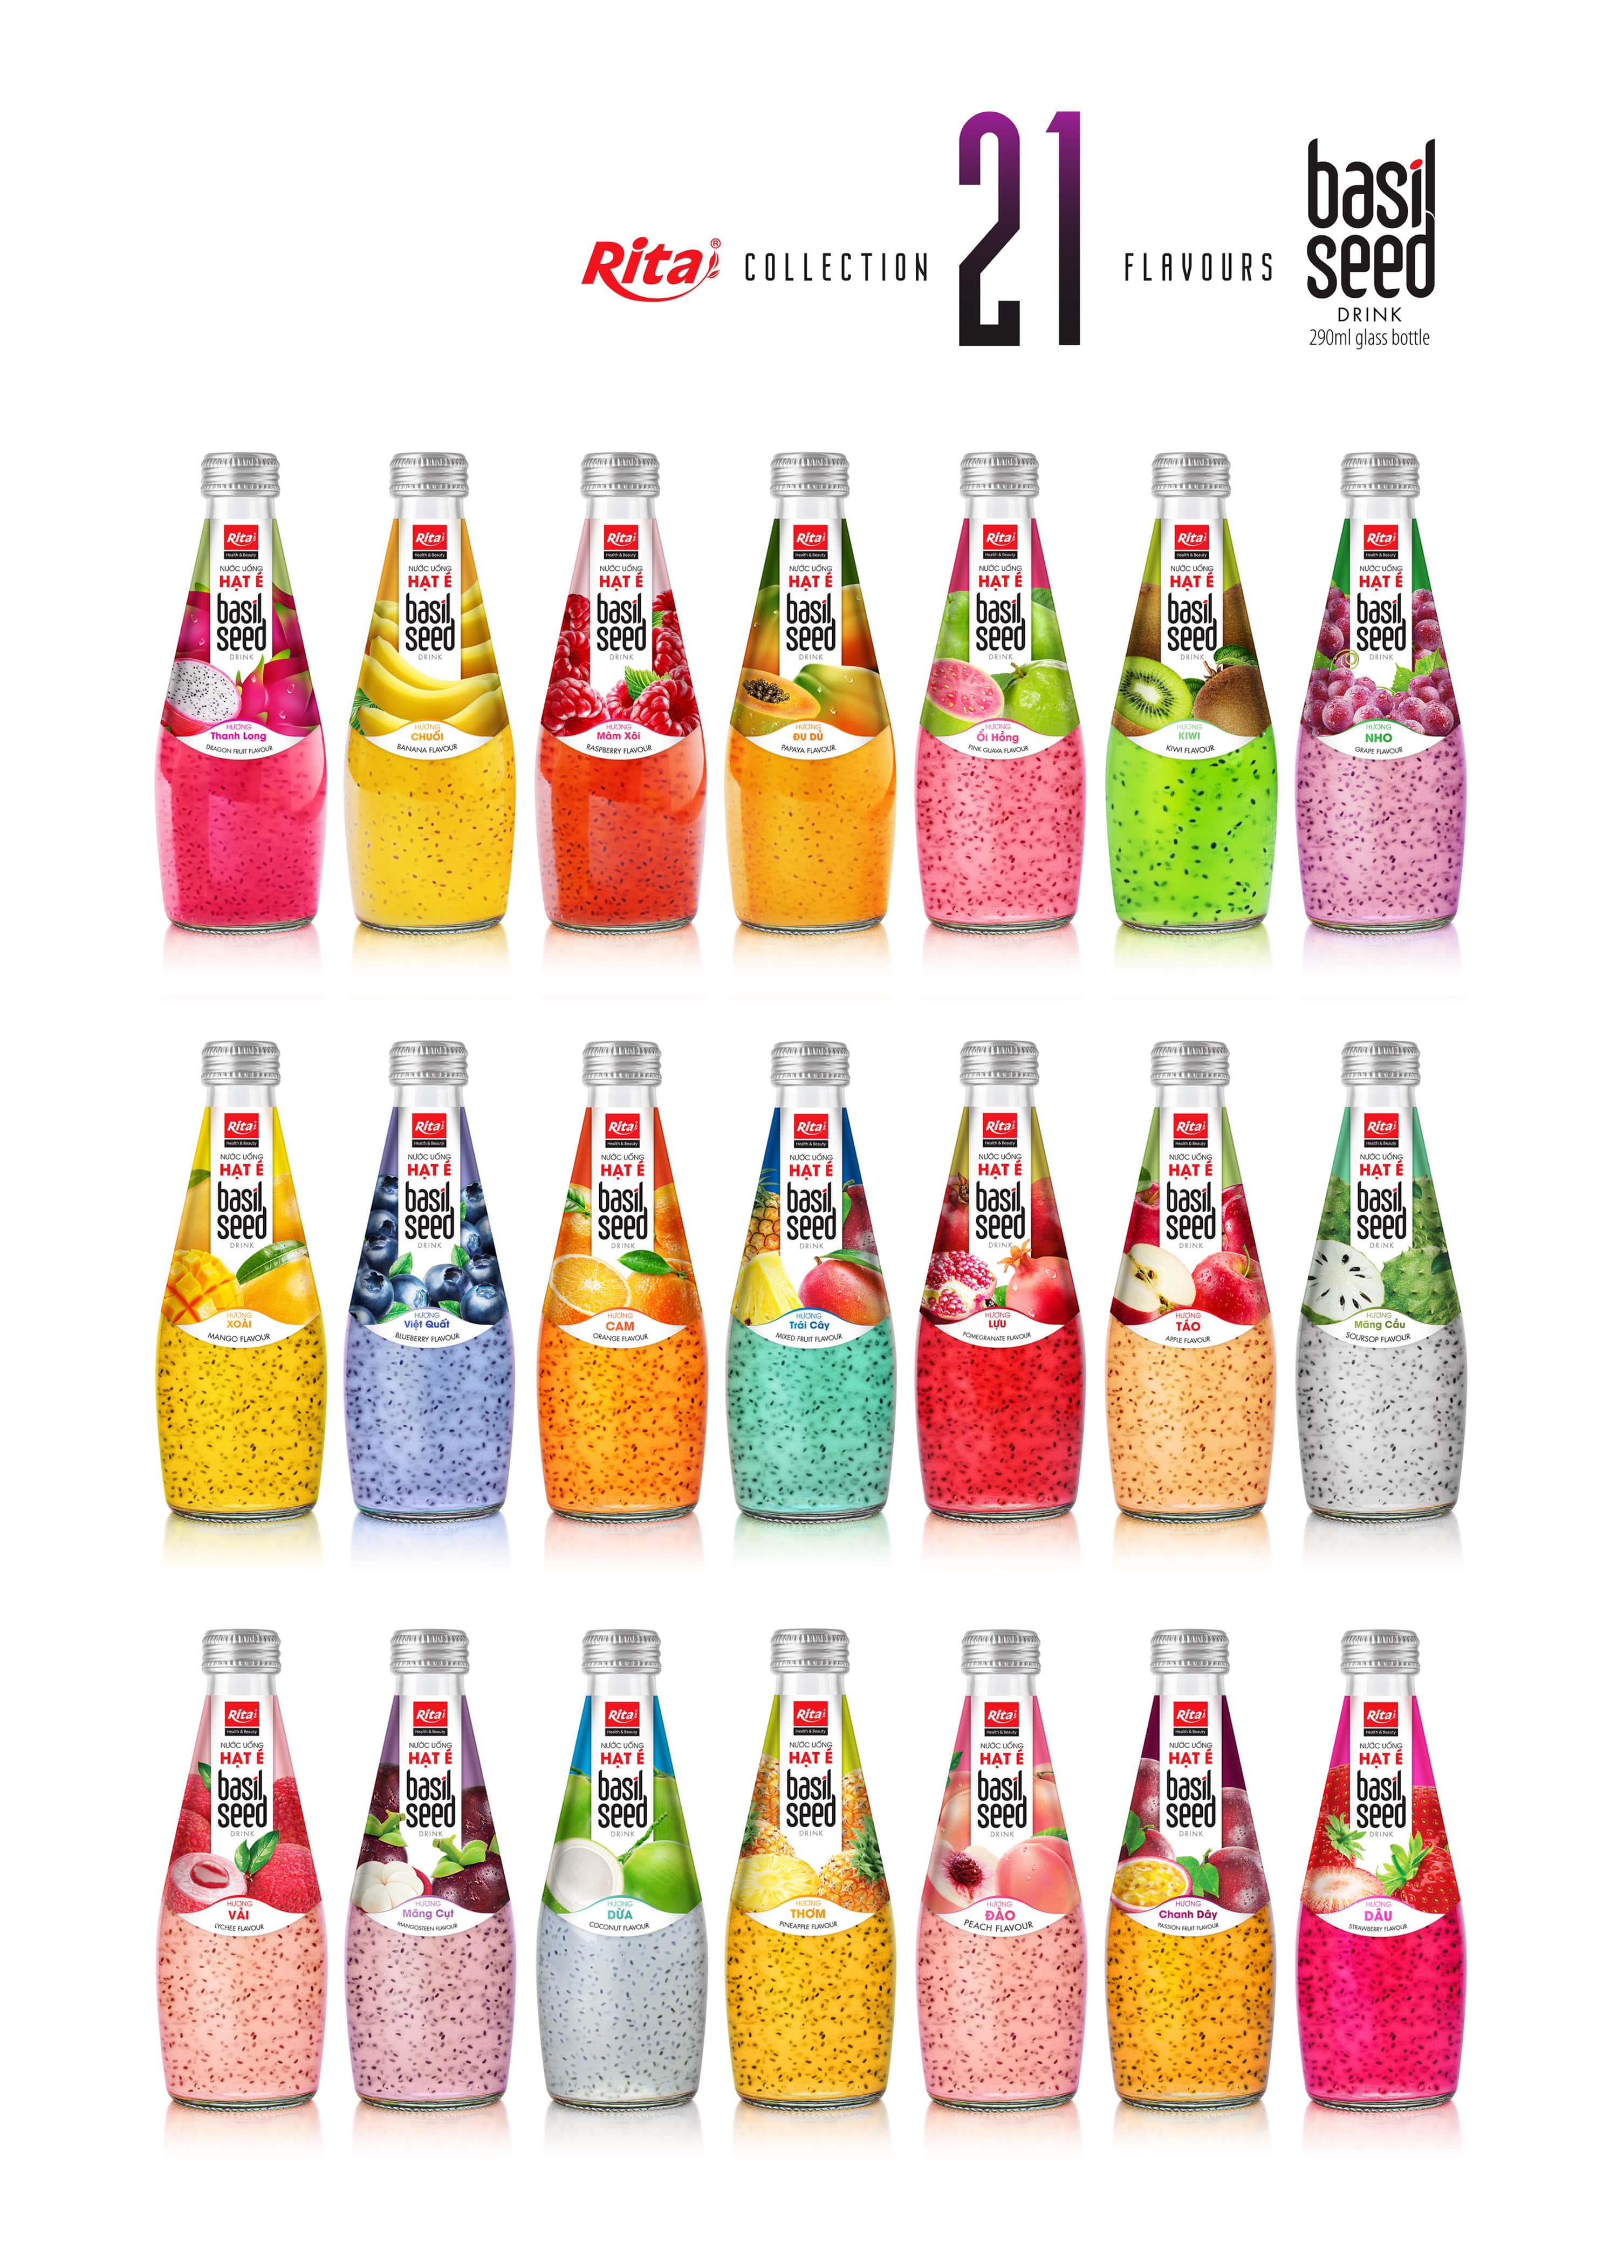 Poster 21 flavours Basil Seed drink 290ml 02 min